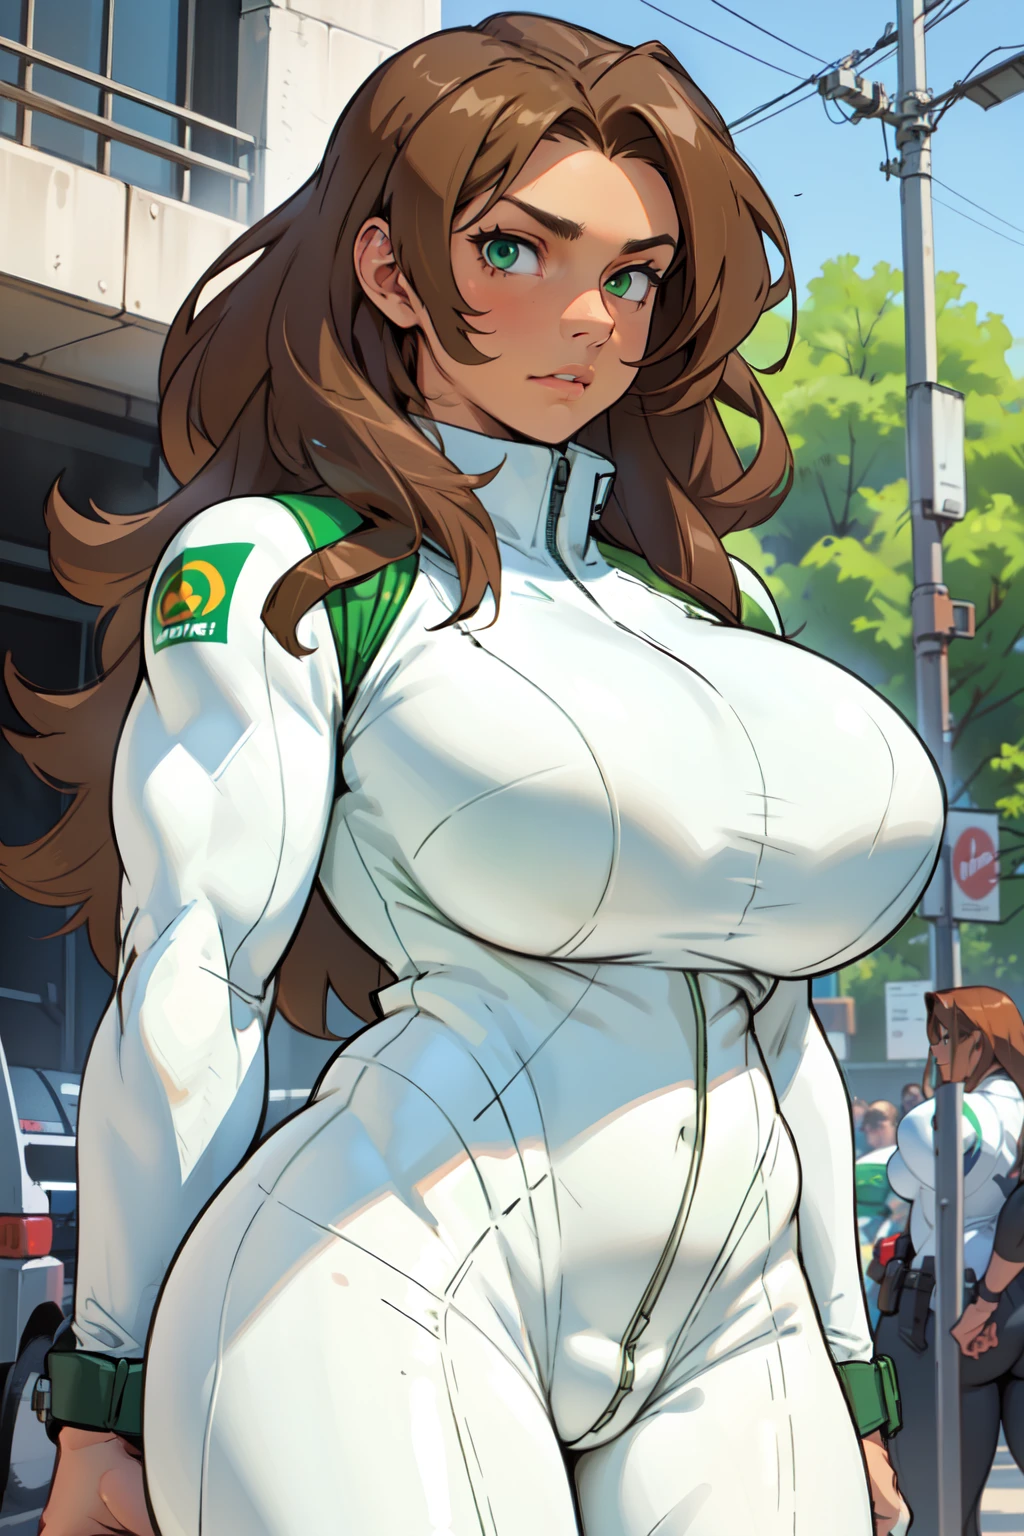 1 girl (Huge muscles, huge breasts, huge thighs) brown hair green eyes tanned skin muscular thick thick thick very long hair thick thick ((((White bodysuit)))) ((((White bodysuit))))